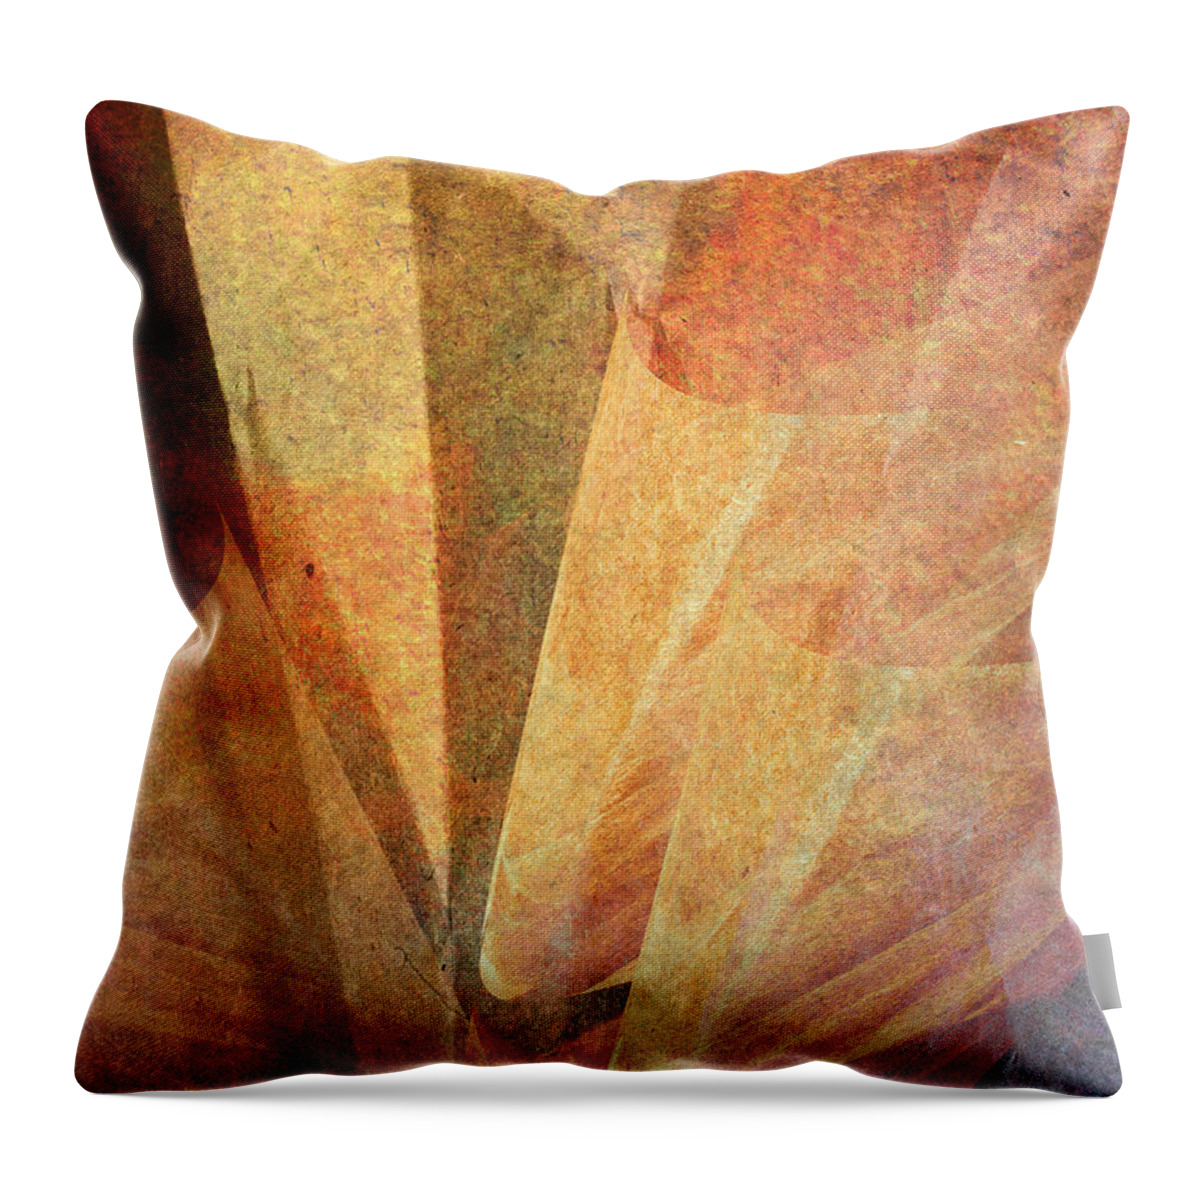 Two Blooms For Money Throw Pillow featuring the digital art Two Blooms for Money by Jean Moore